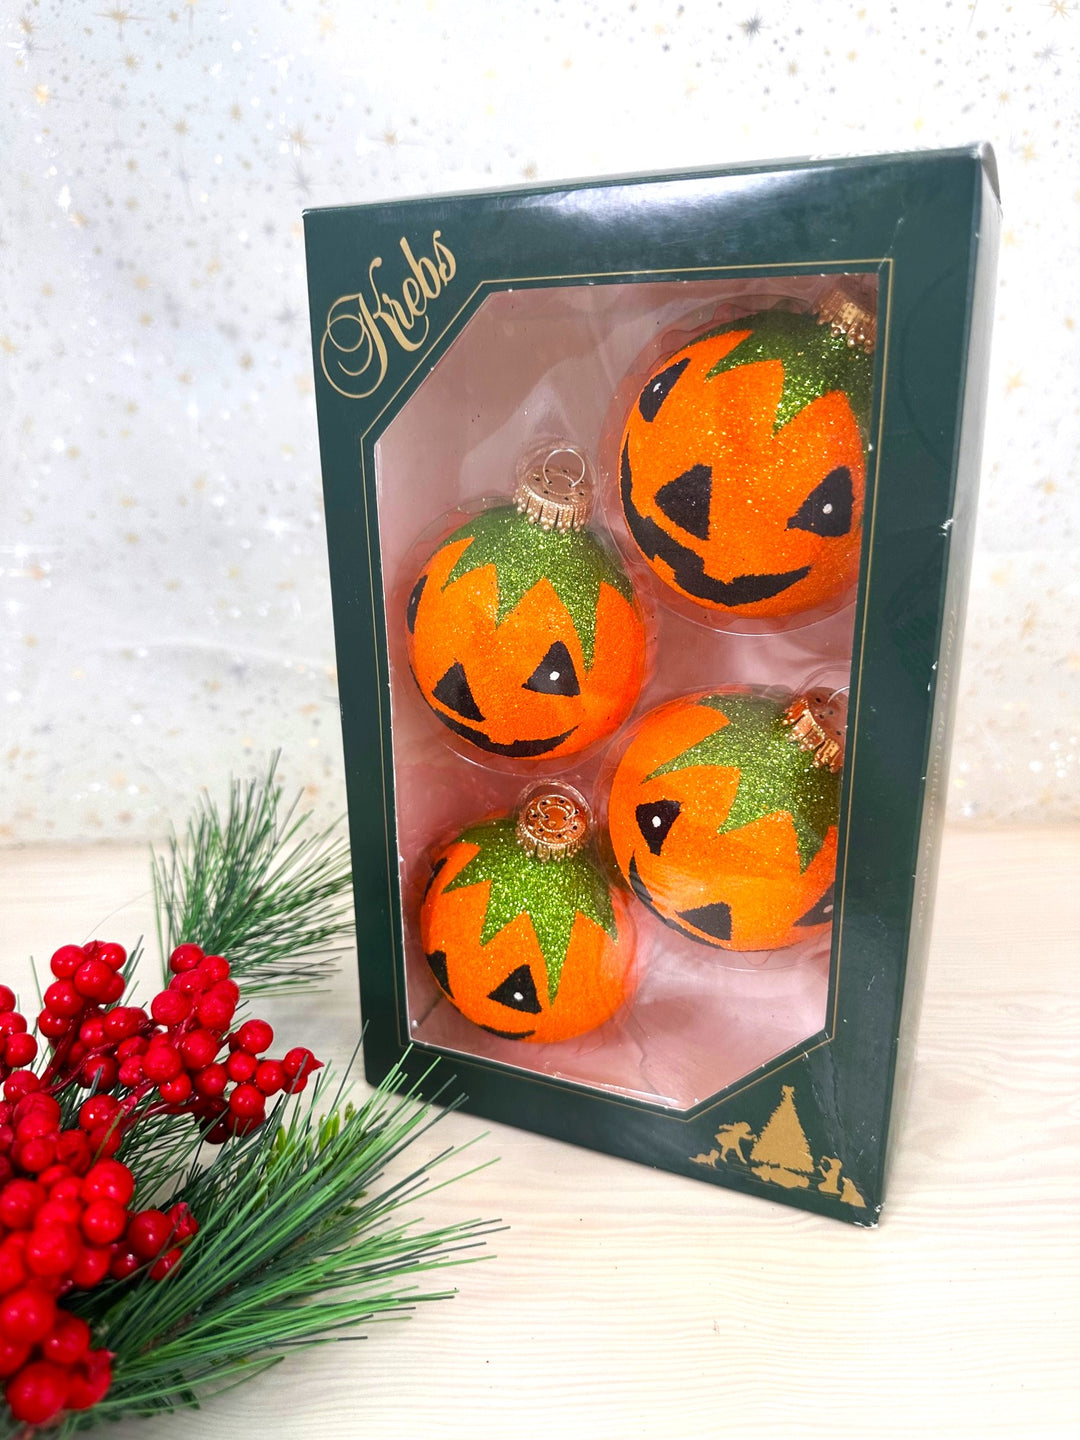 Halloween Tree Ornaments - 67mm/2.625" Decorated Glass Balls from Christmas by Krebs - Handmade Seamless Hanging Holiday Decorations for Trees - Set of 4 (Orange Glitter Jack-O-Lantern)